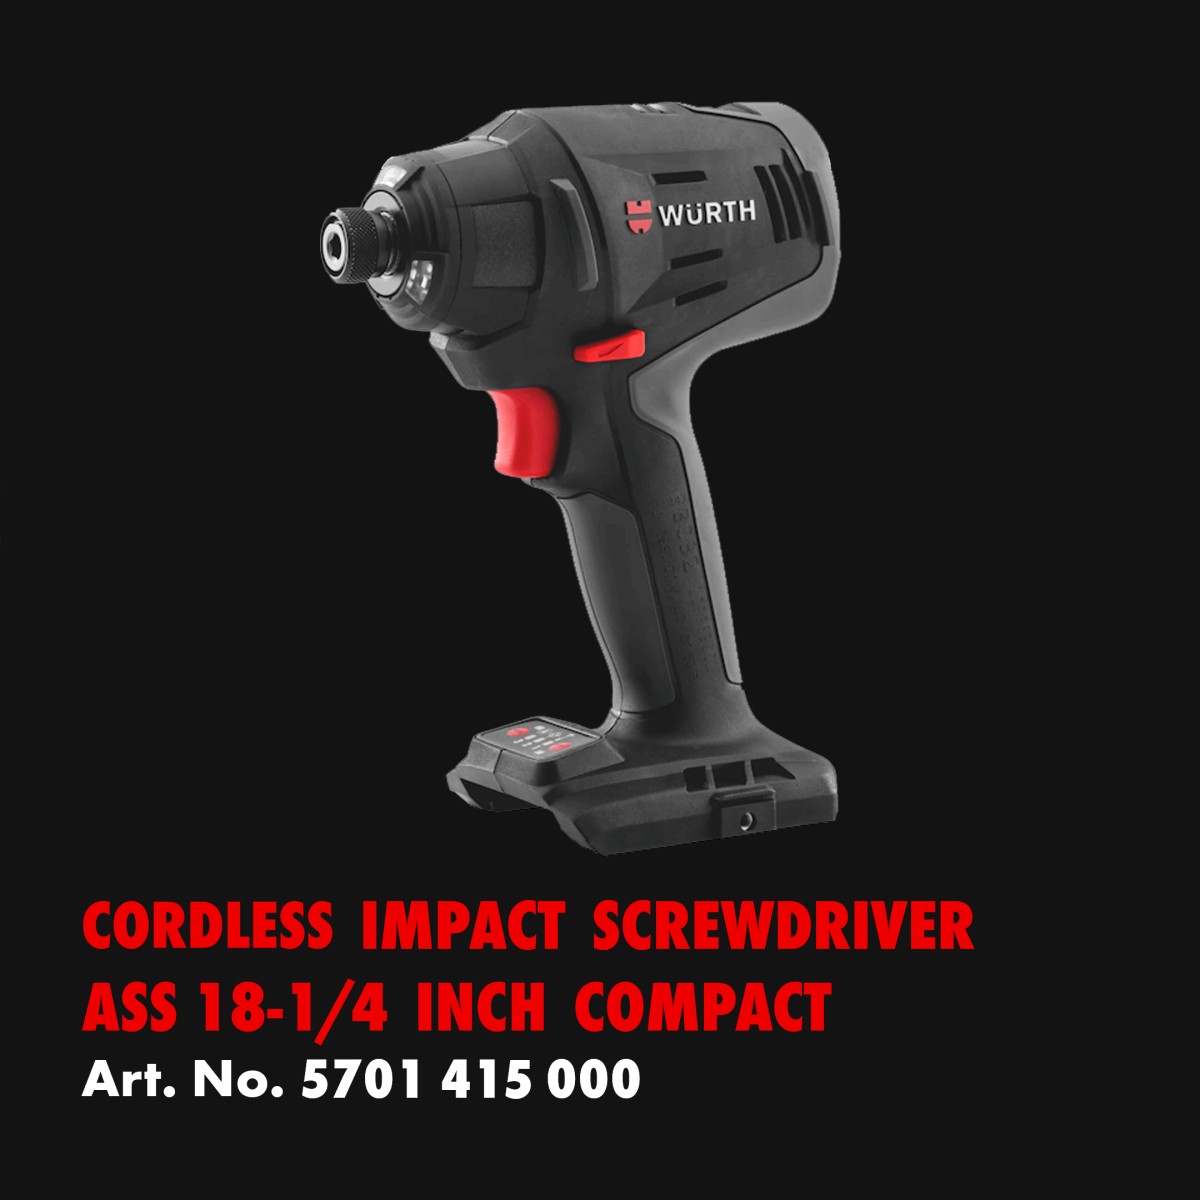 Cordless Impact Screwdriver ASS 18-1/4 Inch Compact